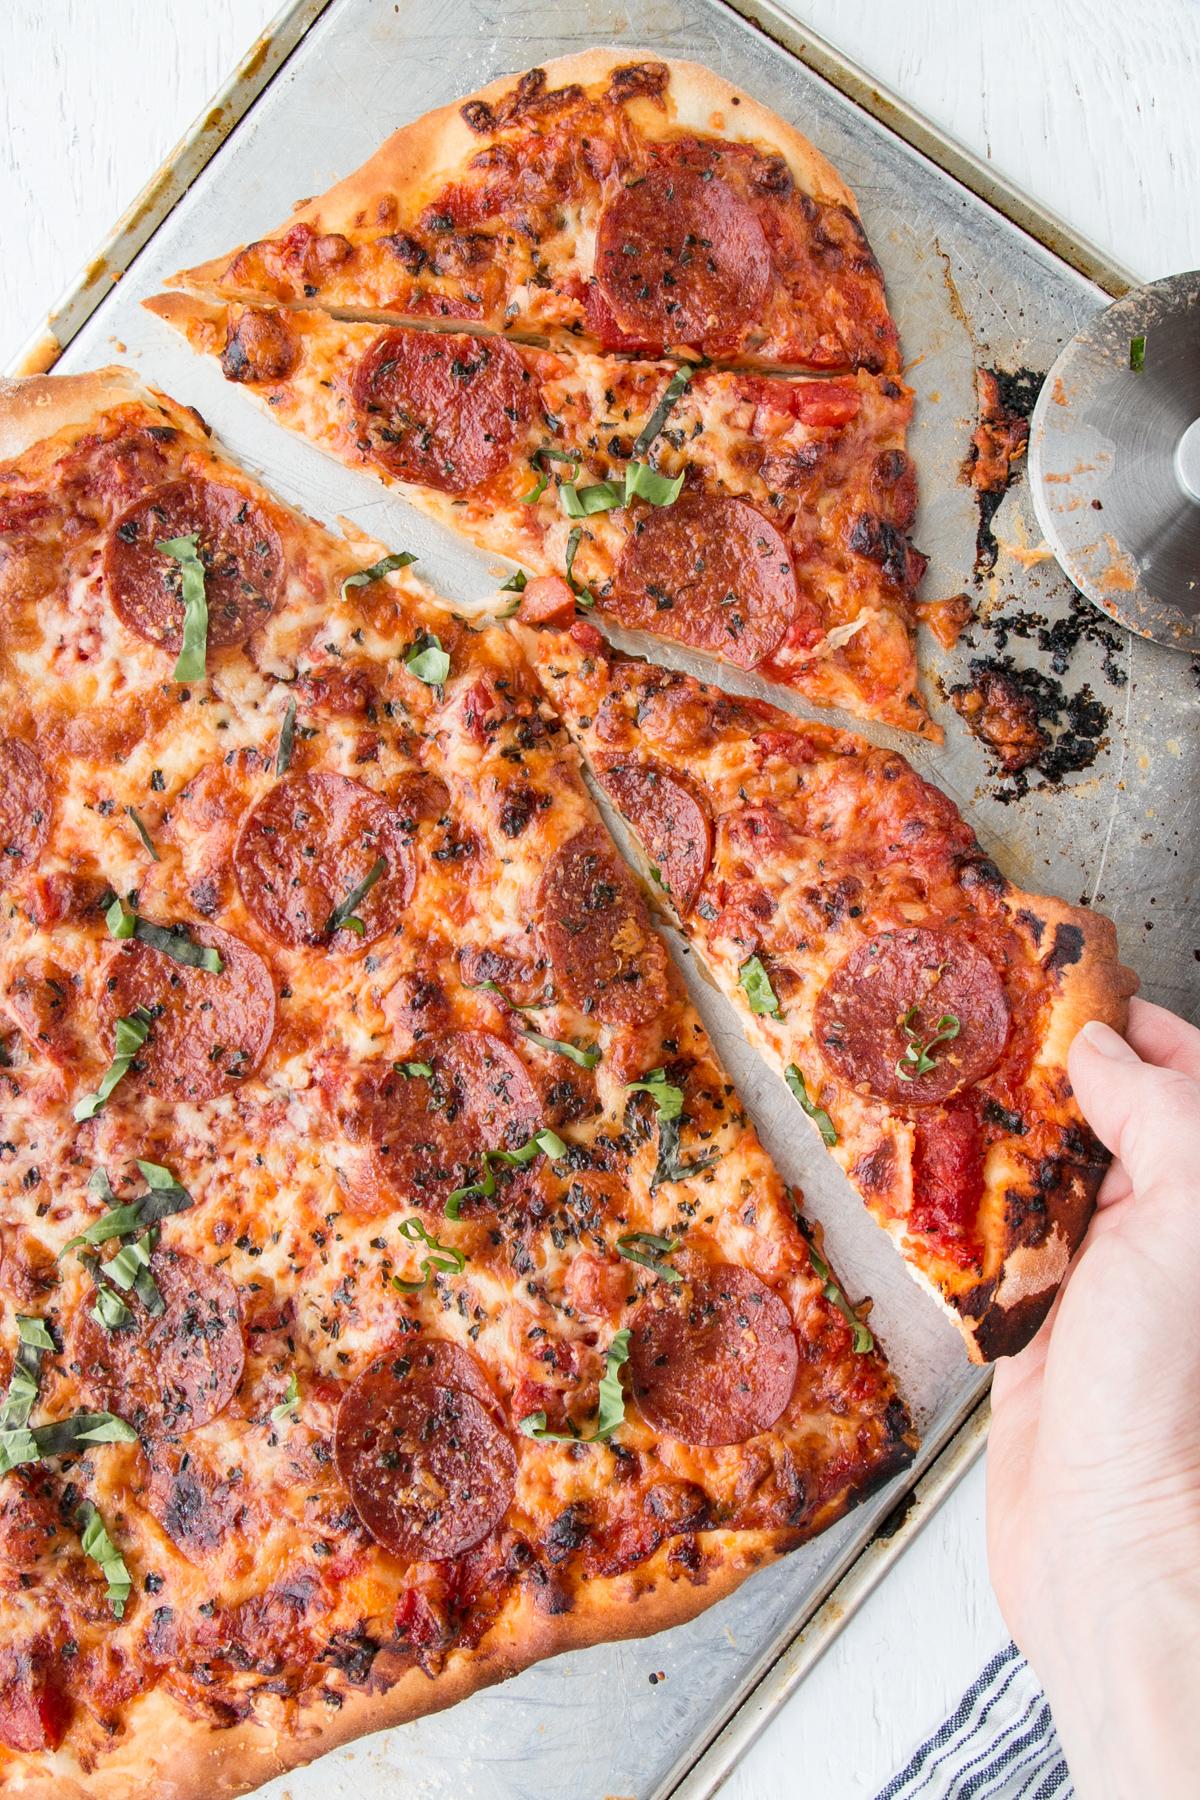 Homemade Pepperoni Pizza | Cooking with Kids, a classic recipe with tips and tricks to help get kids cooking. Getting the kids involved in making a well-loved dish like a Pepperoni Pizza for a family meal.